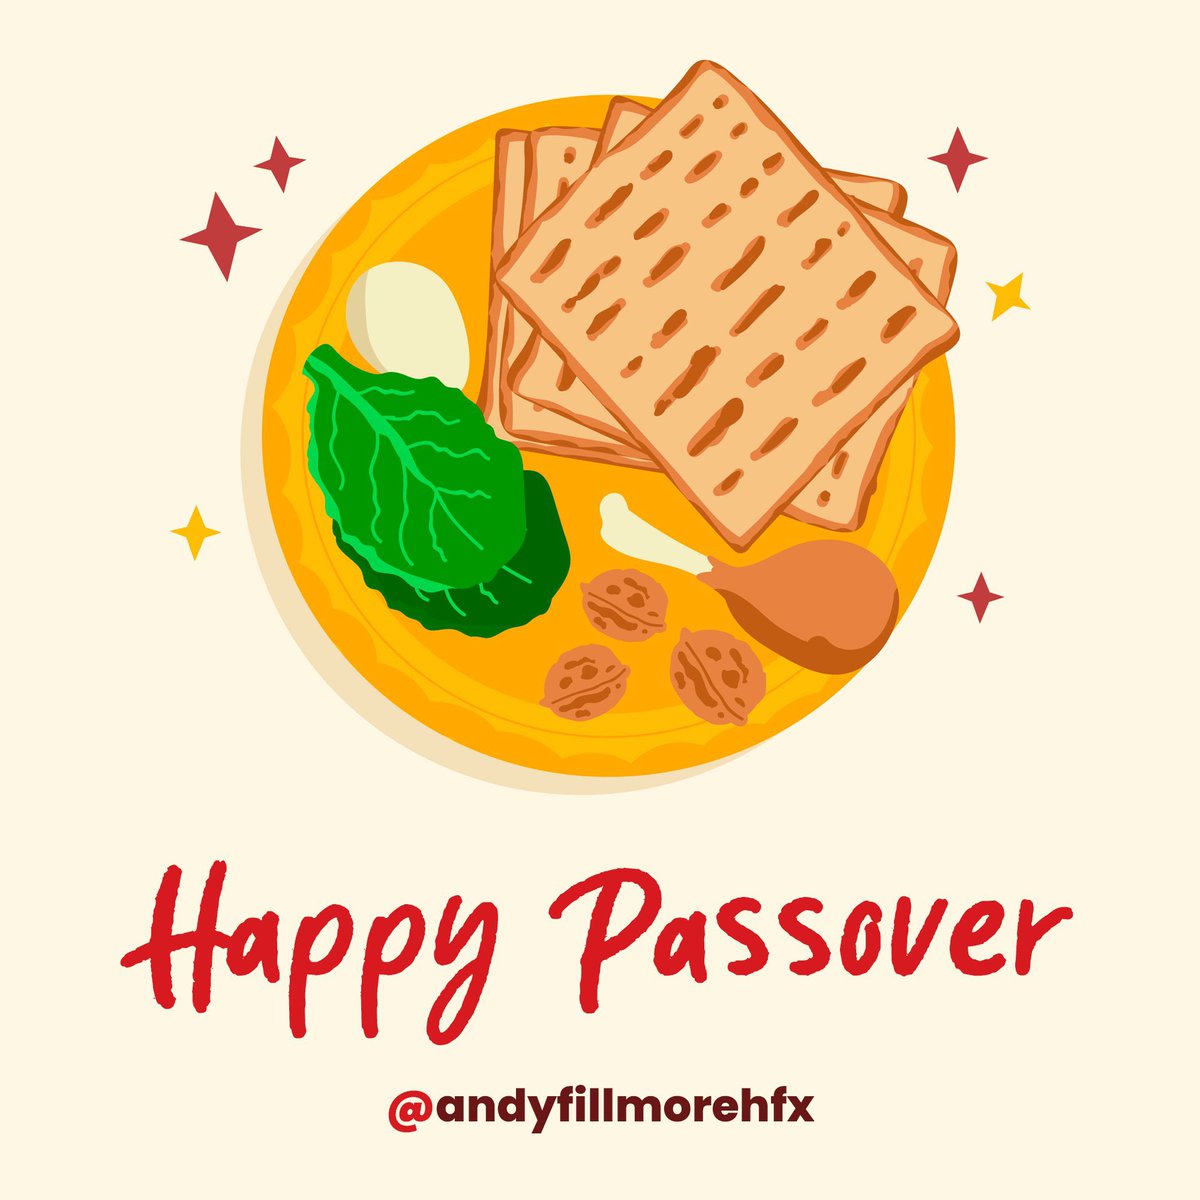 As sundown this evening marks the beginning of #Passover, I want to wish the Jewish community in #Halifax a blessed holiday. Chag Pesach Sameach!